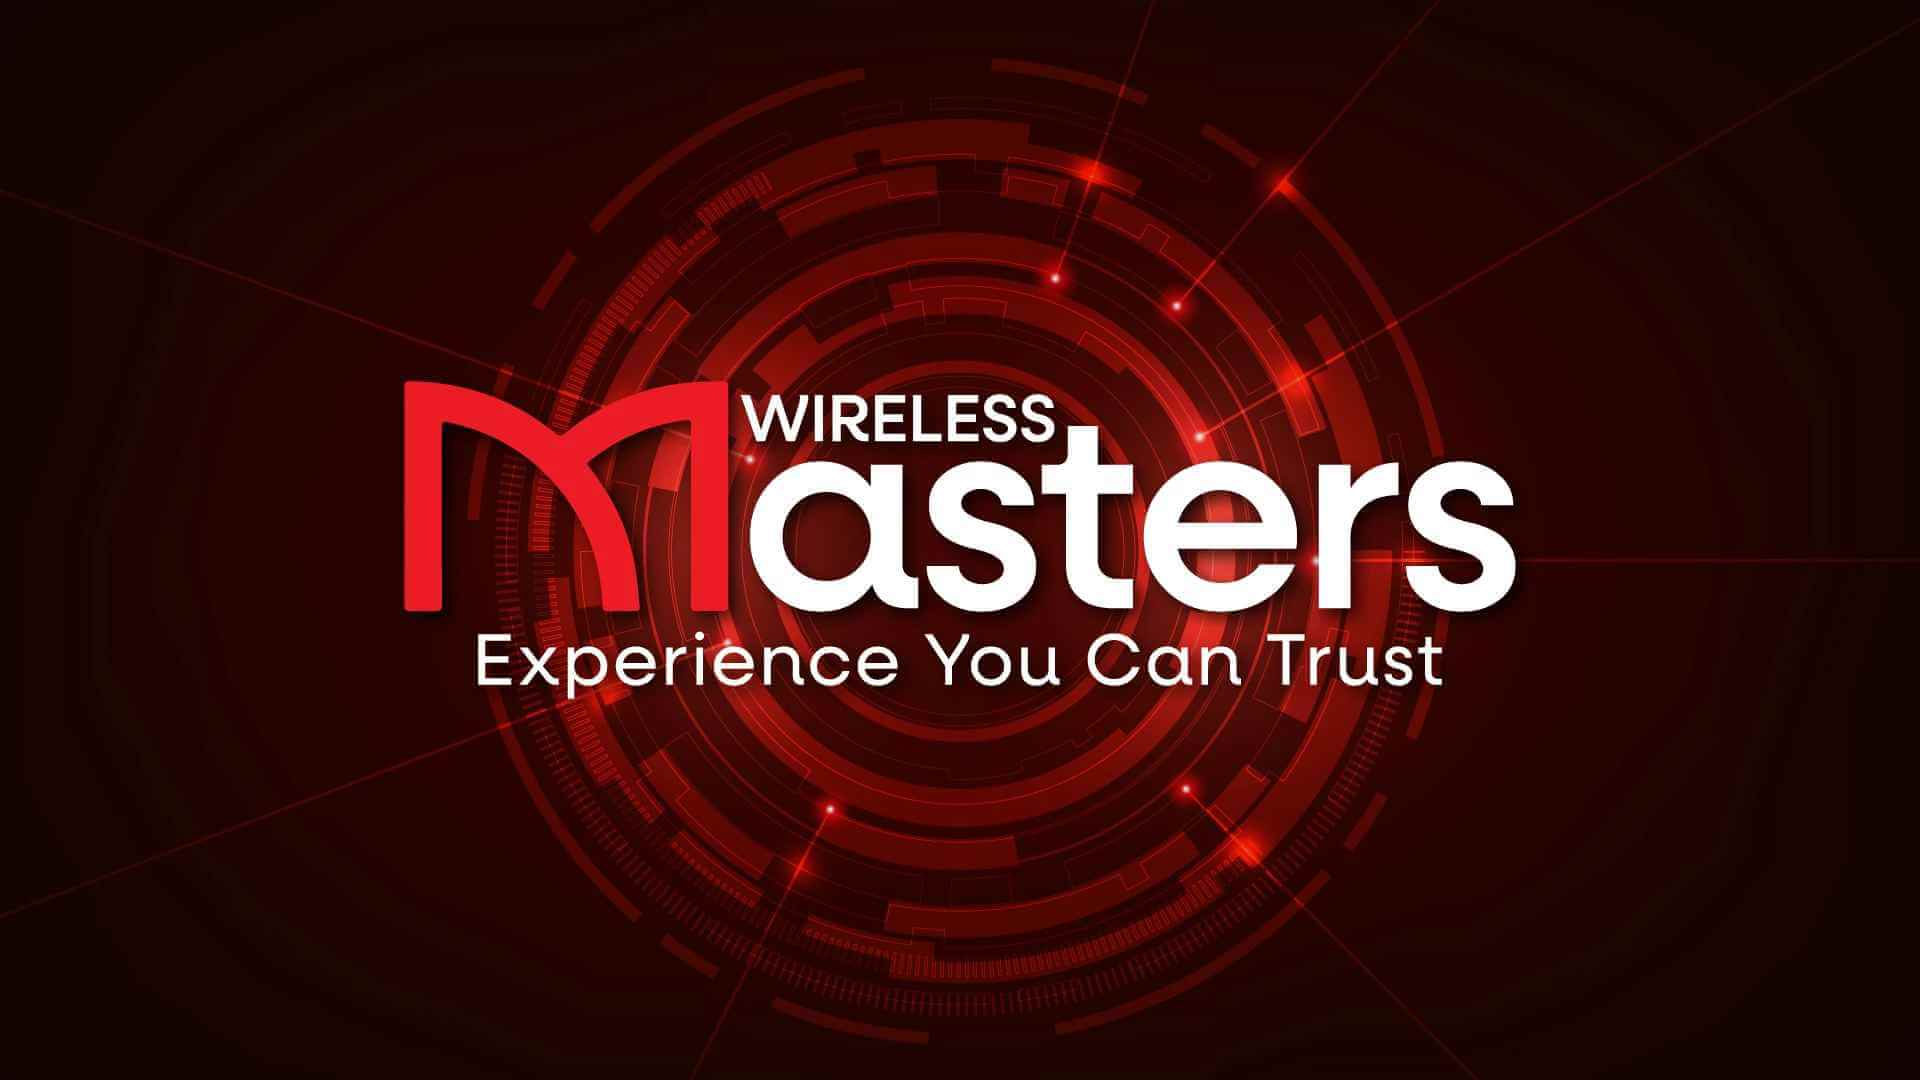 wireless master experience you can trust